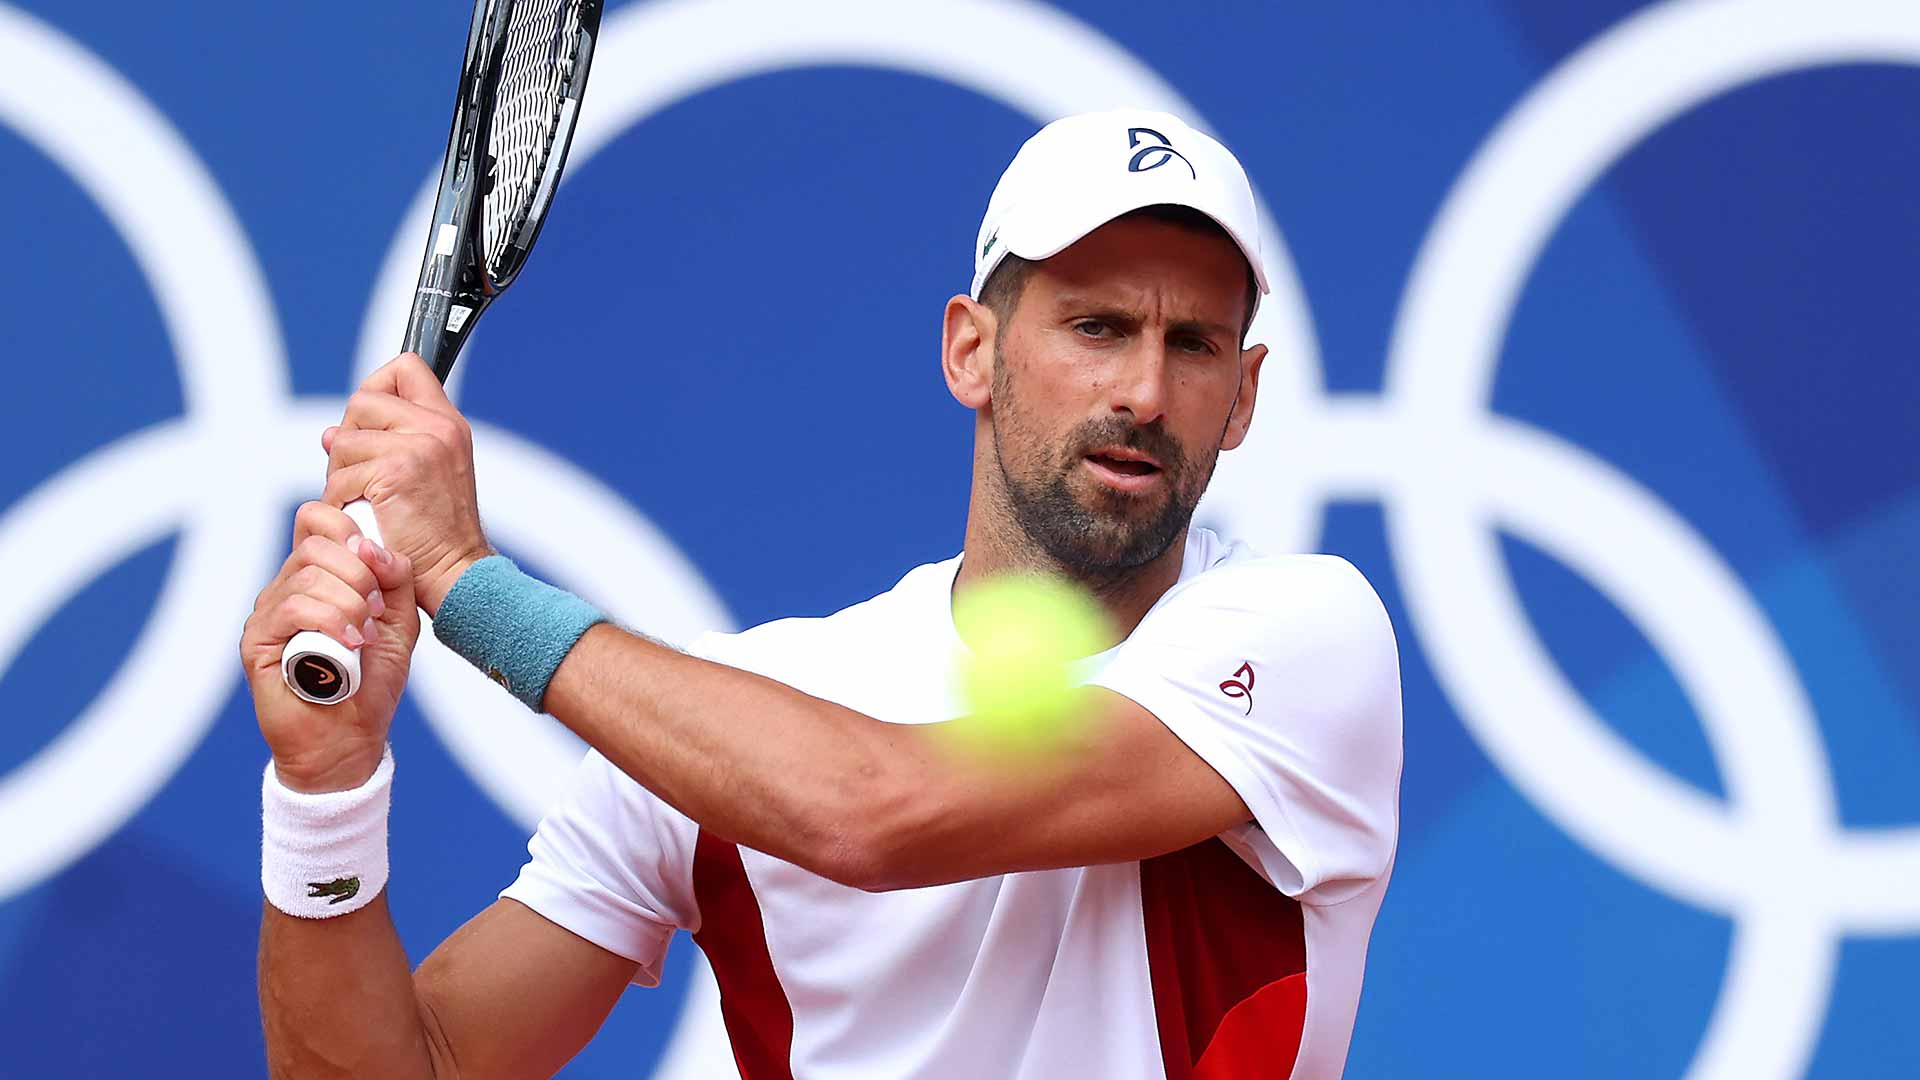 Novak Djokovic is seeking his first Olympics singles gold medal, and first title of the year.